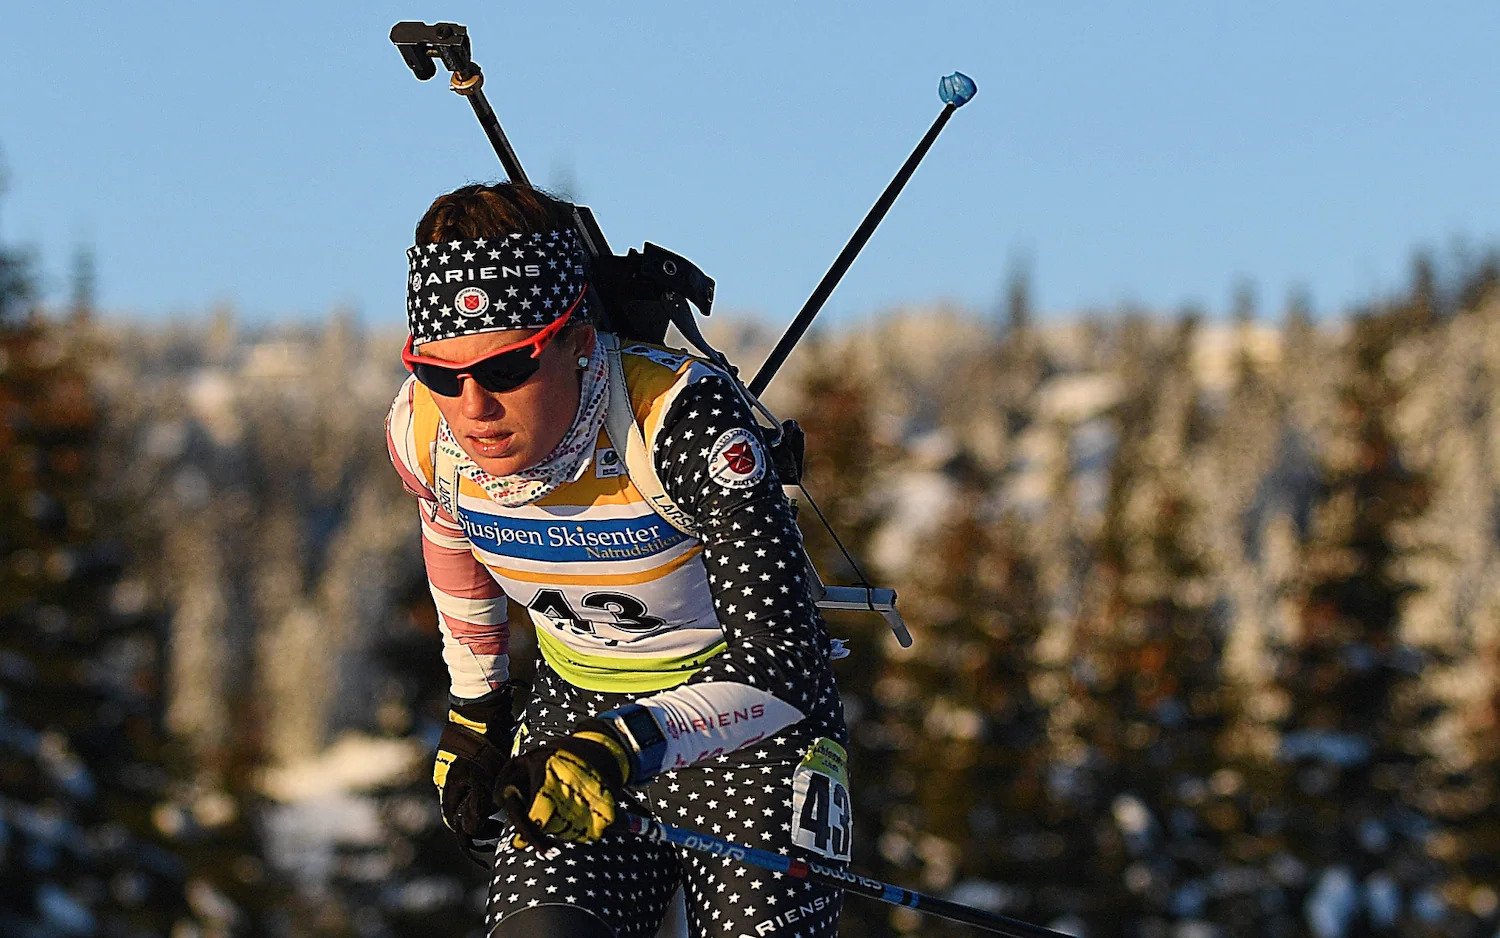 GRP Biathlete Hallie Grossman has been named first alternate and will travel as part of the delegation.